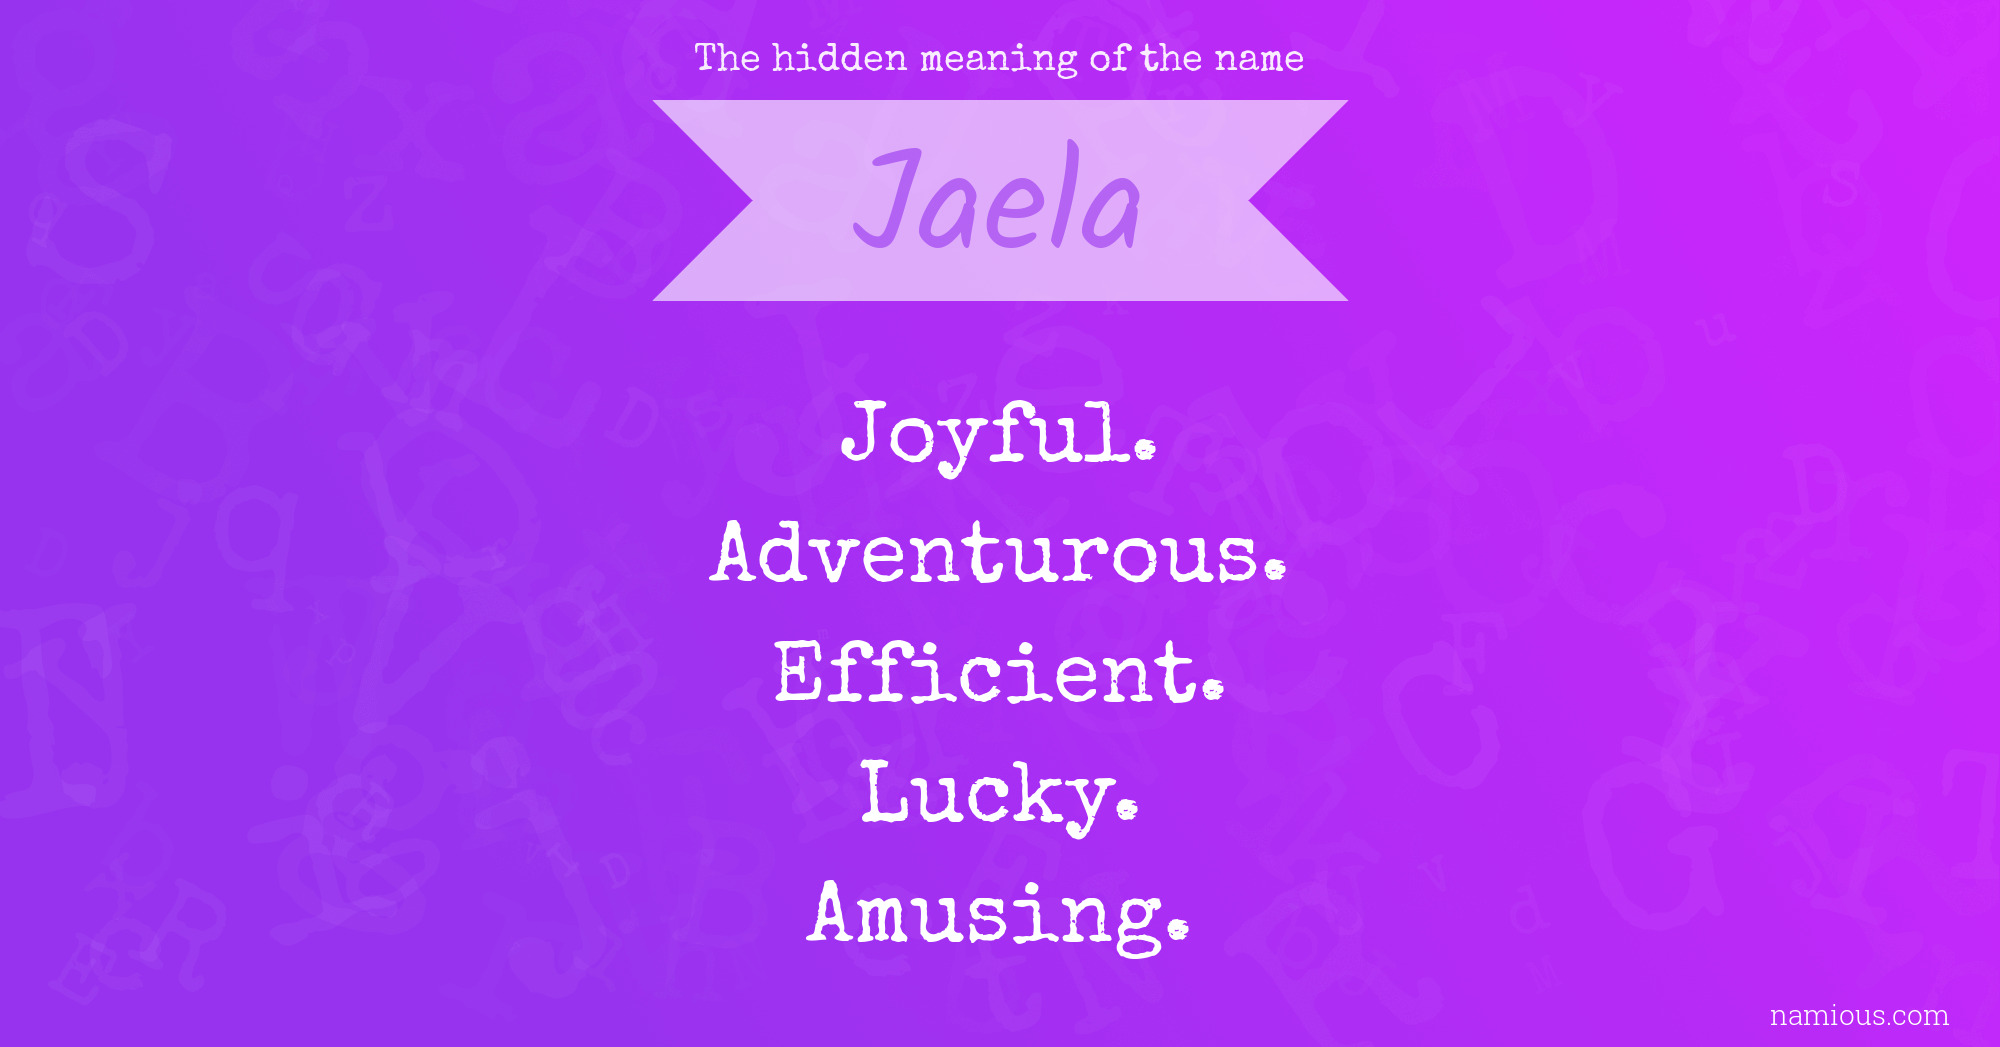 The hidden meaning of the name Jaela